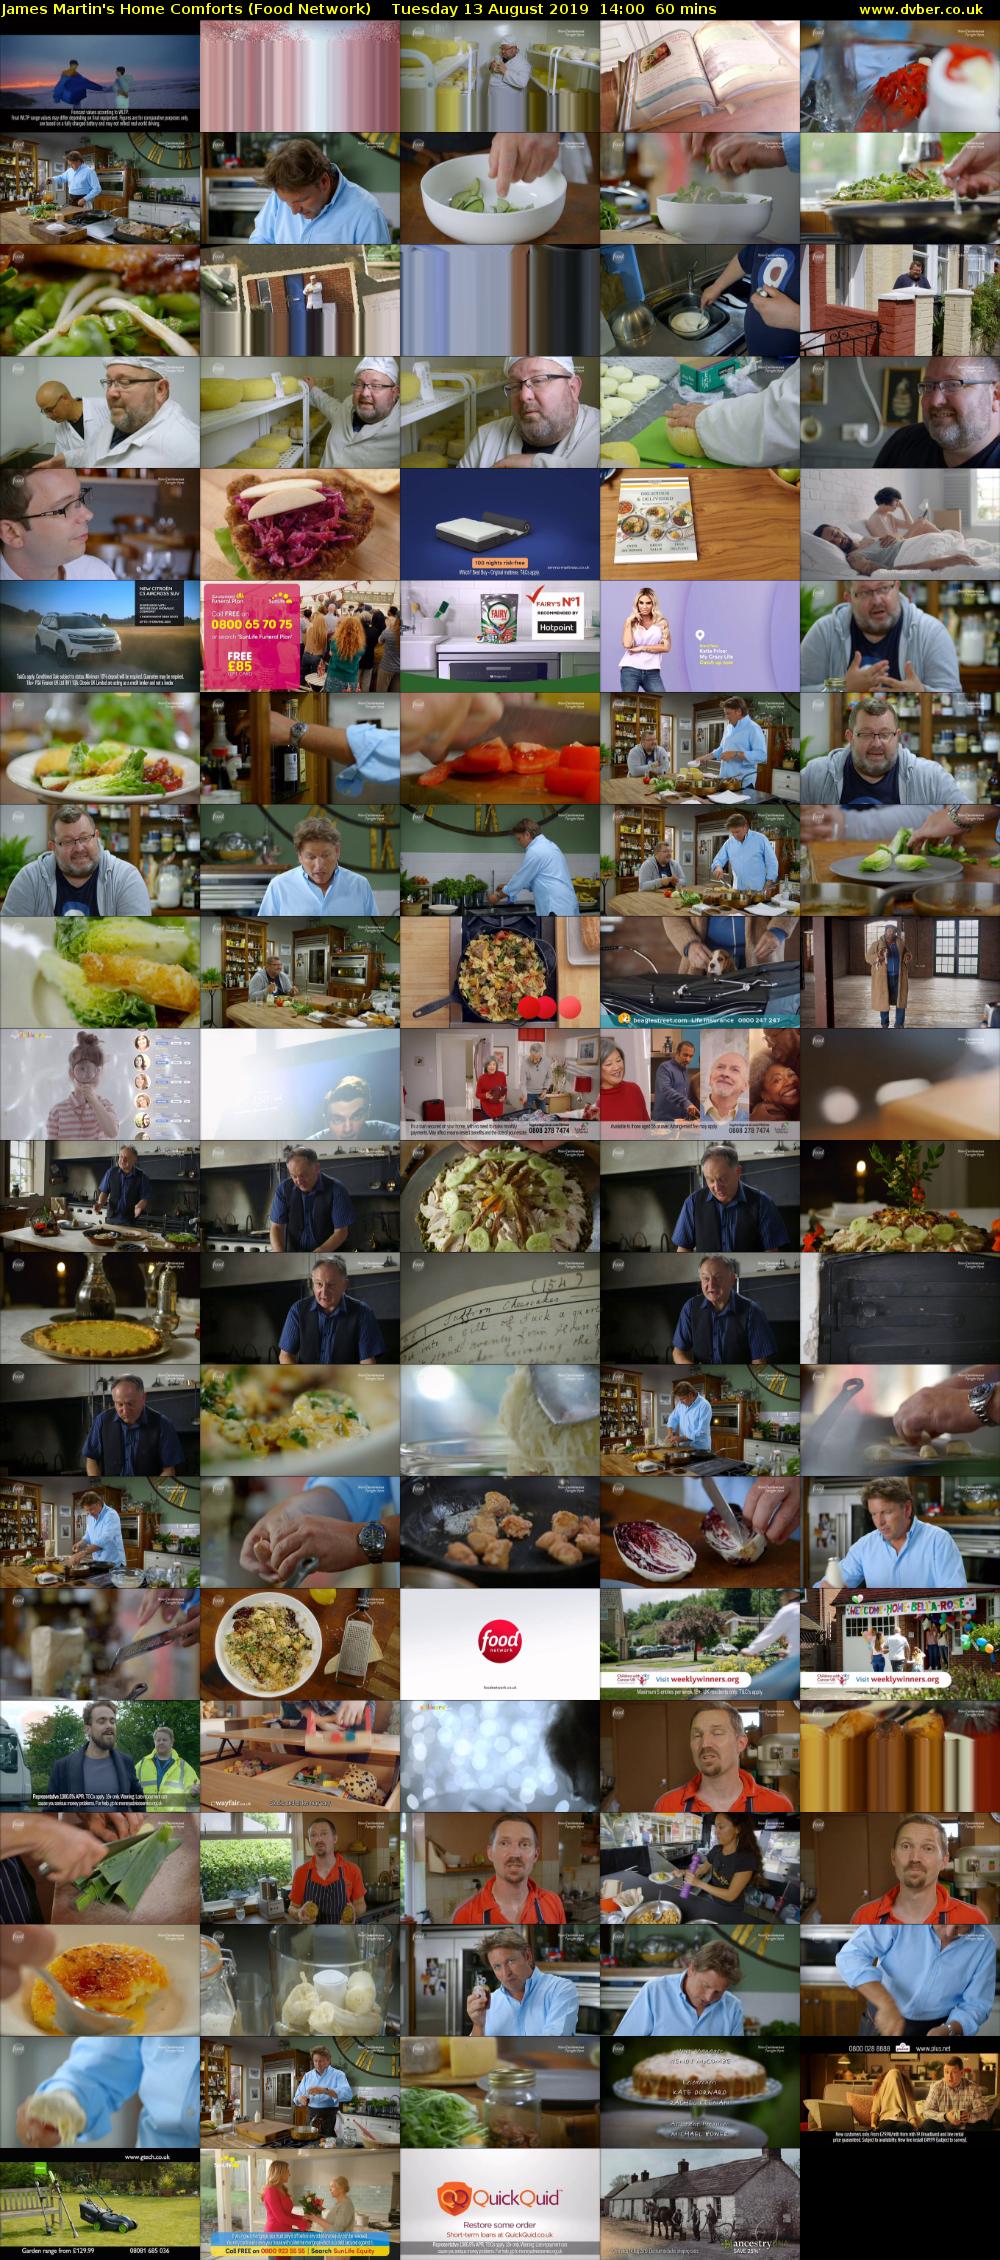 James Martin's Home Comforts (Food Network) Tuesday 13 August 2019 14:00 - 15:00